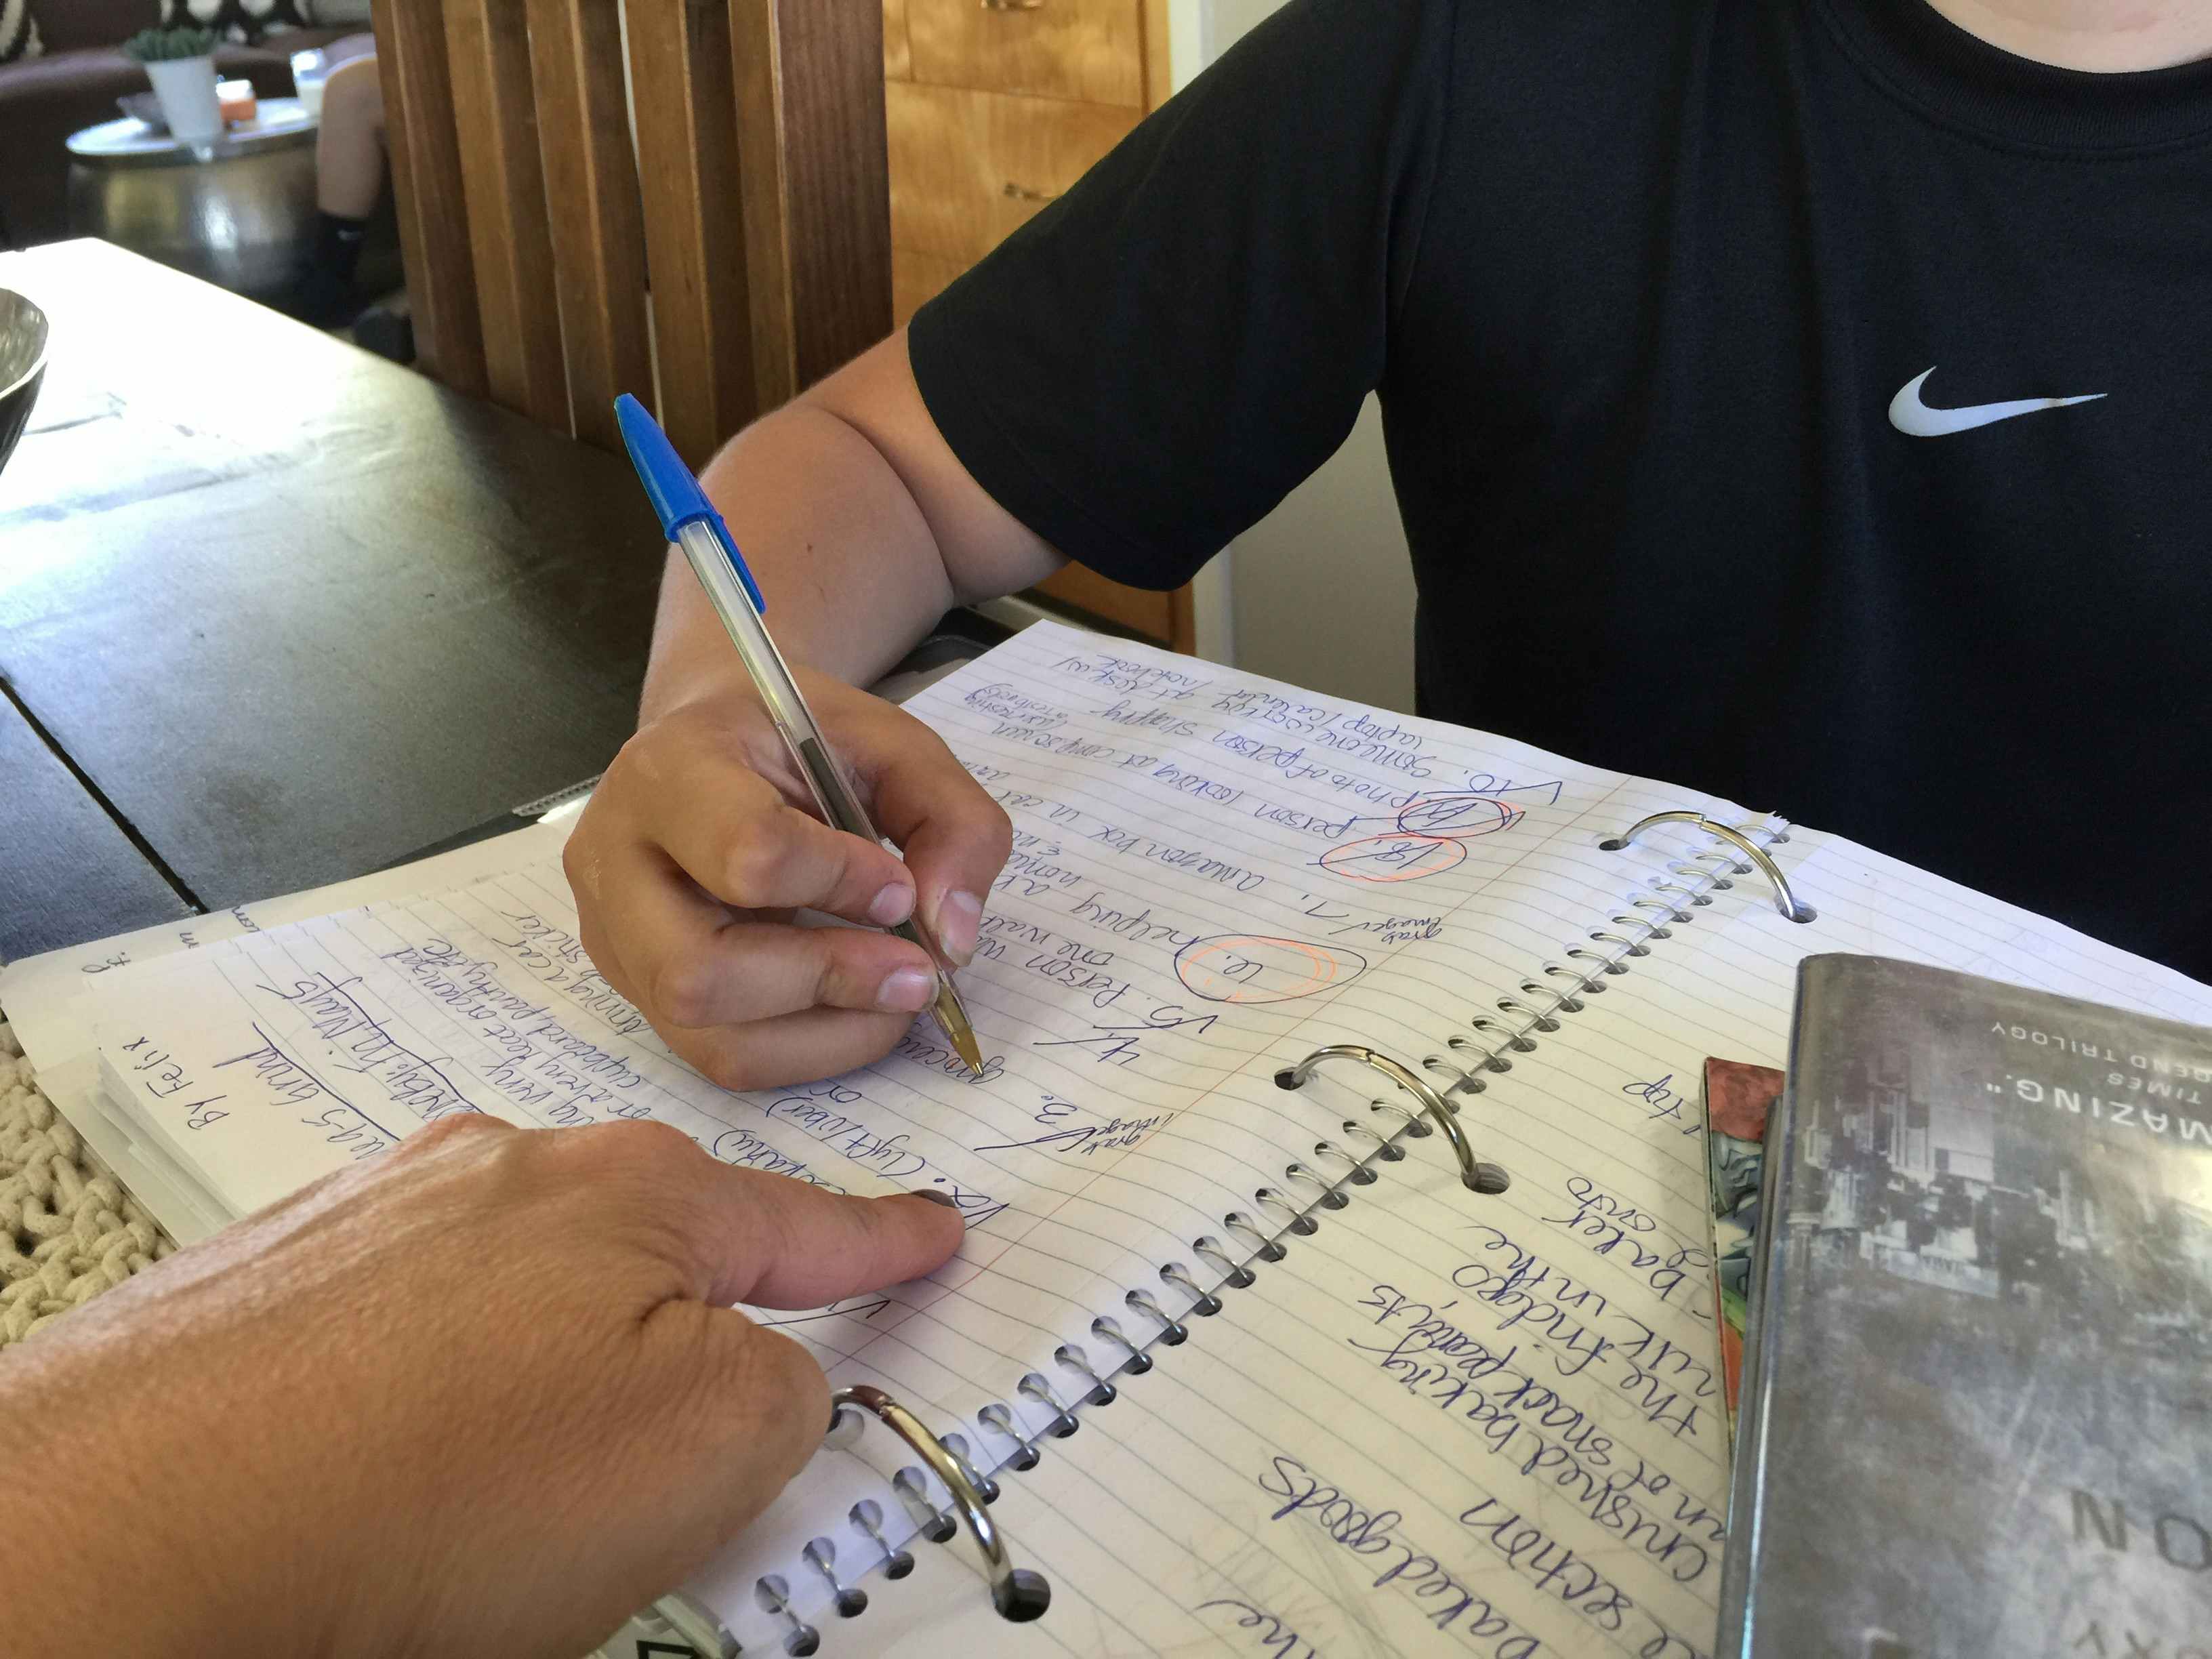 A tutor pointing to a line of a student's homework as he is writing in a notebook.